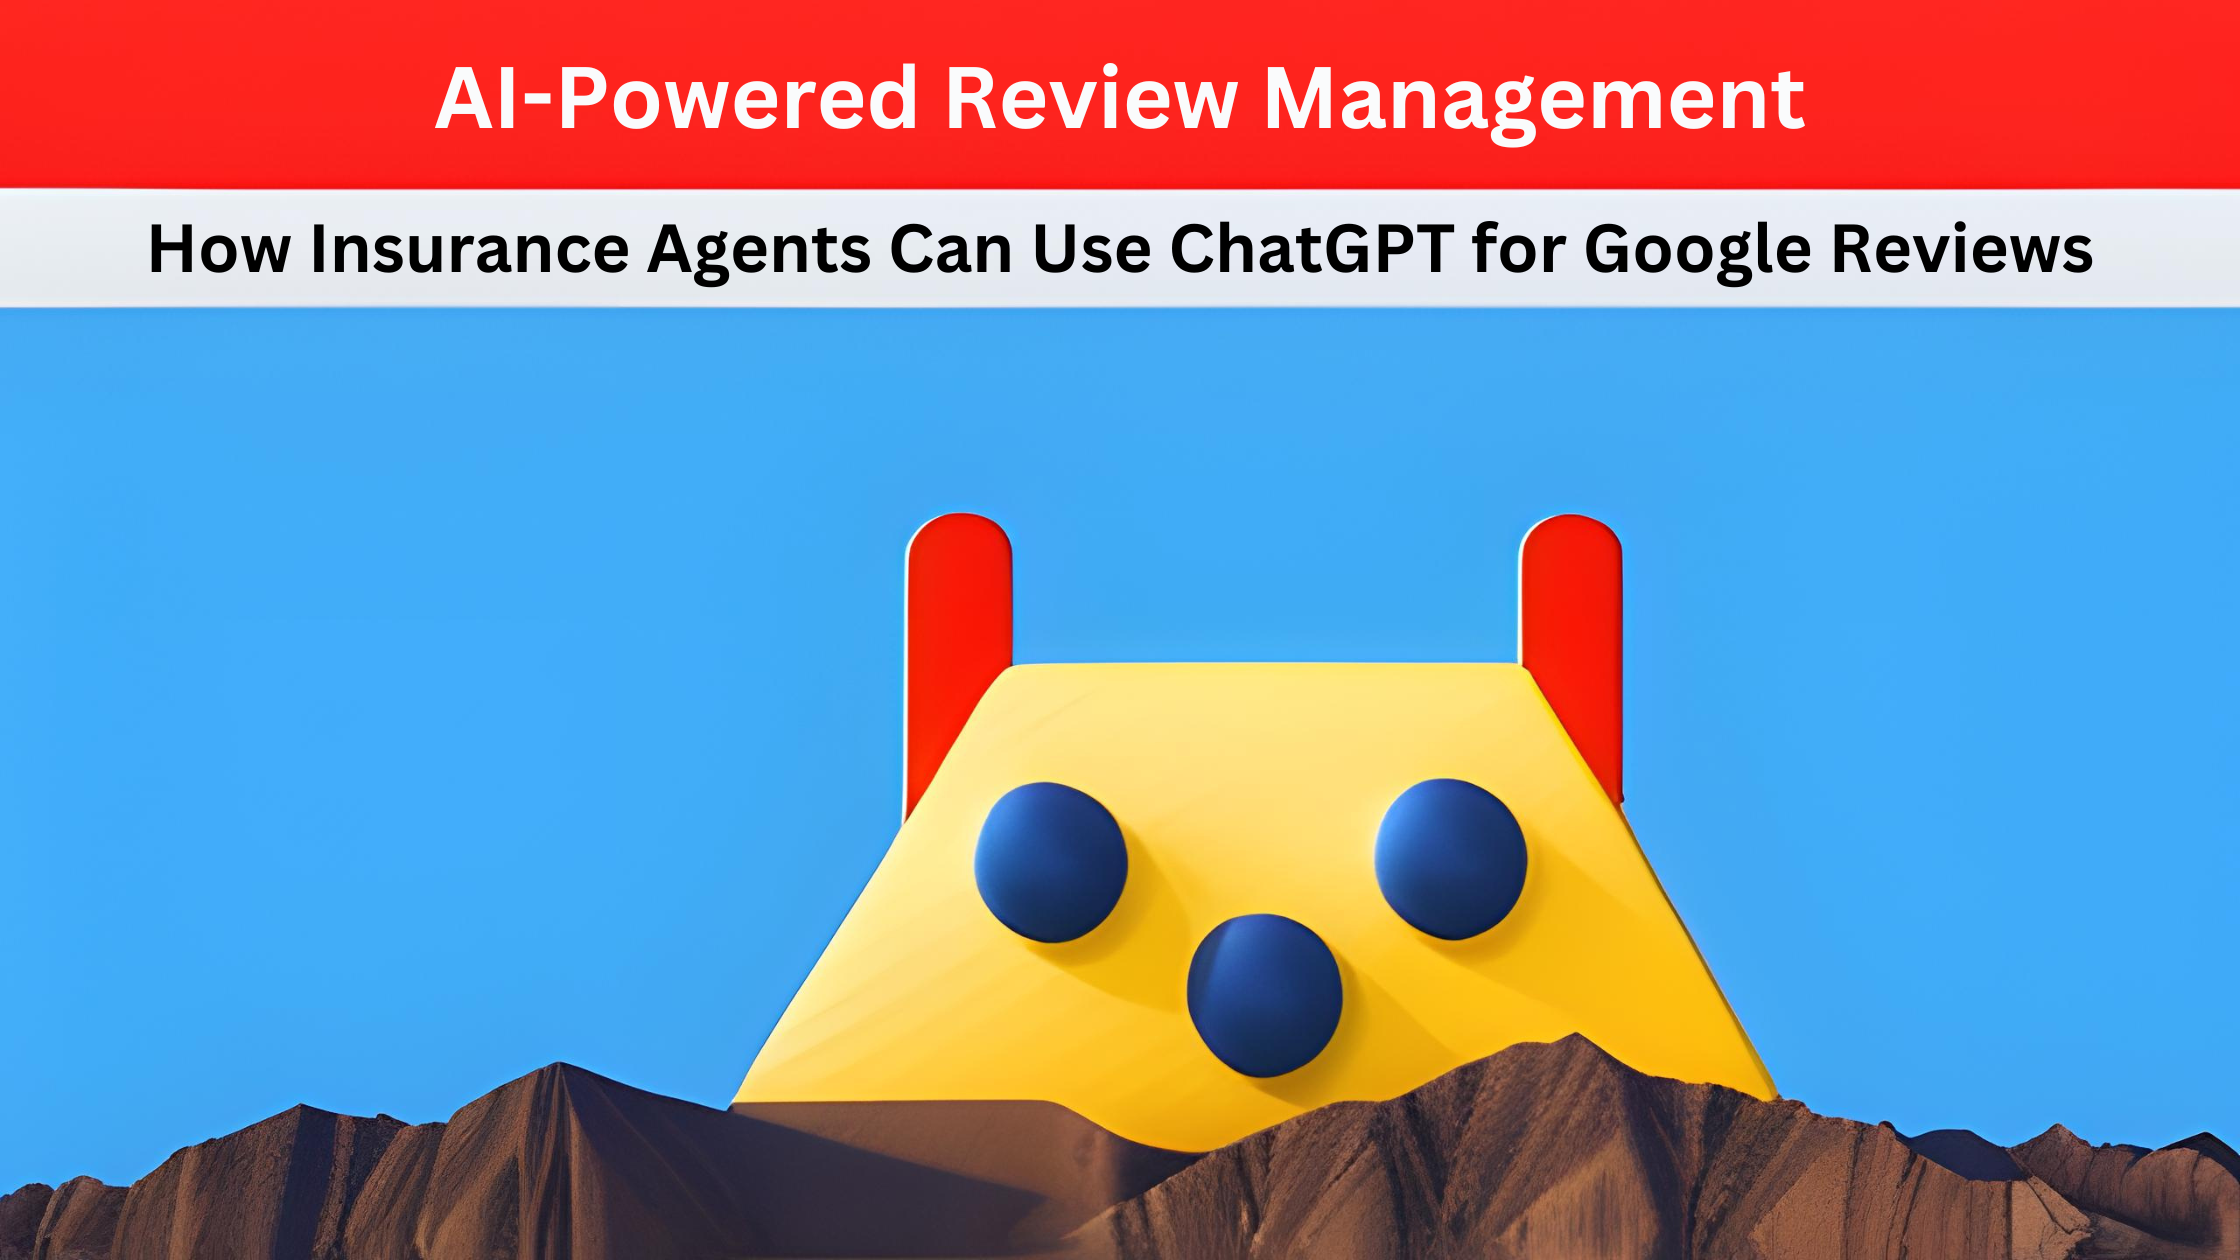 AI-Powered Review Management: How Insurance Agents can Utilize ChatGPT for Google Reviews